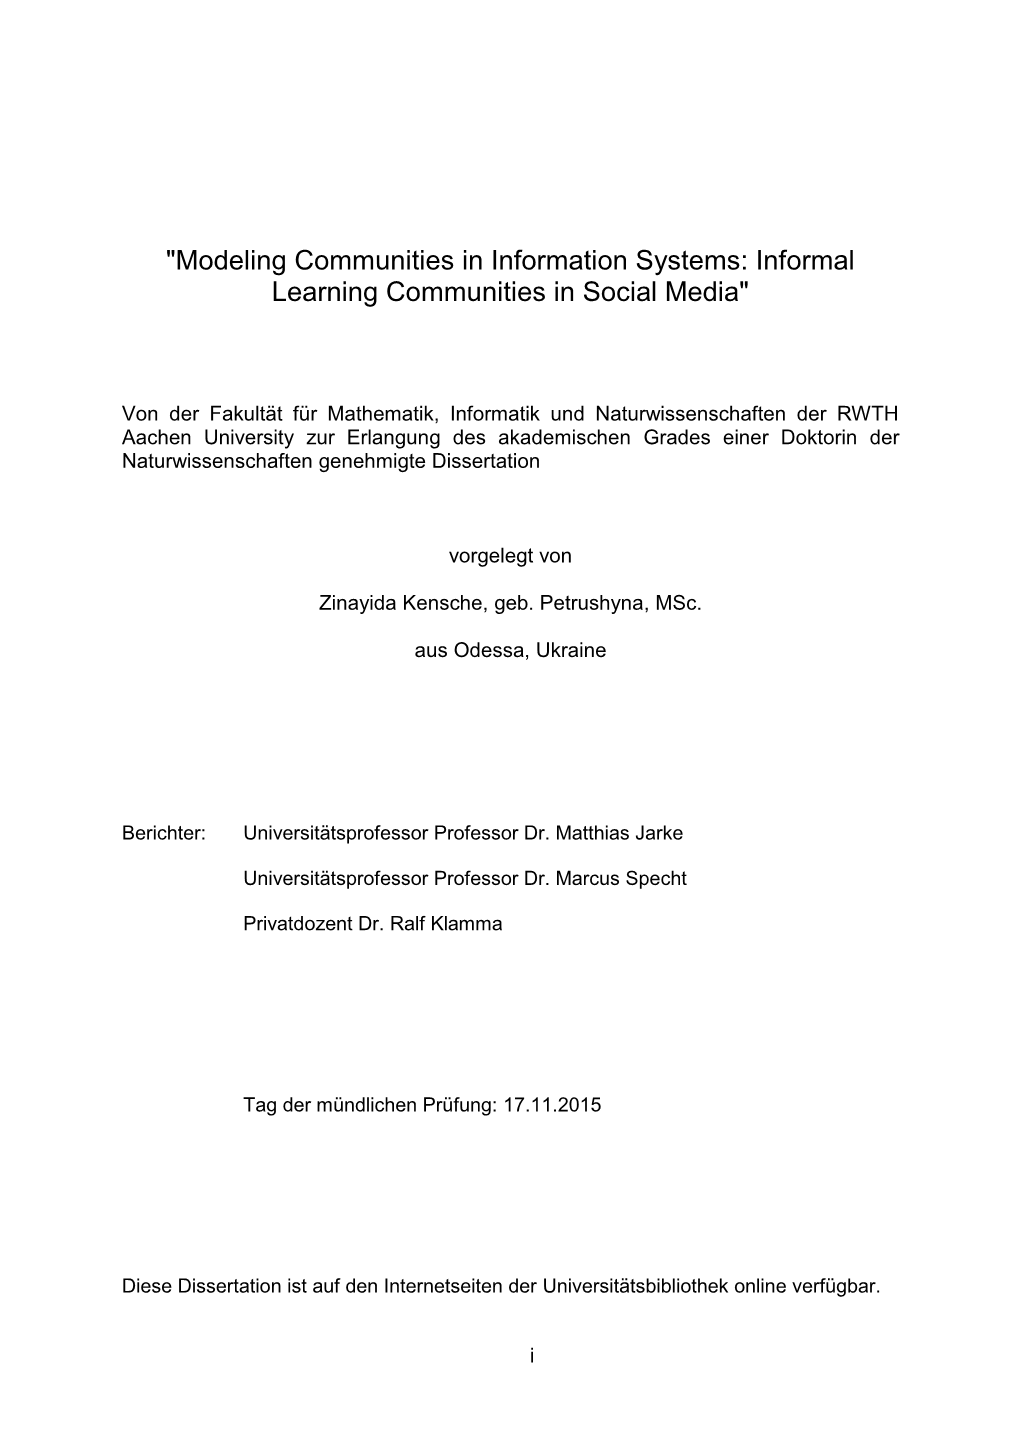 Modeling Communities in Information Systems: Informal Learning Communities in Social Media"